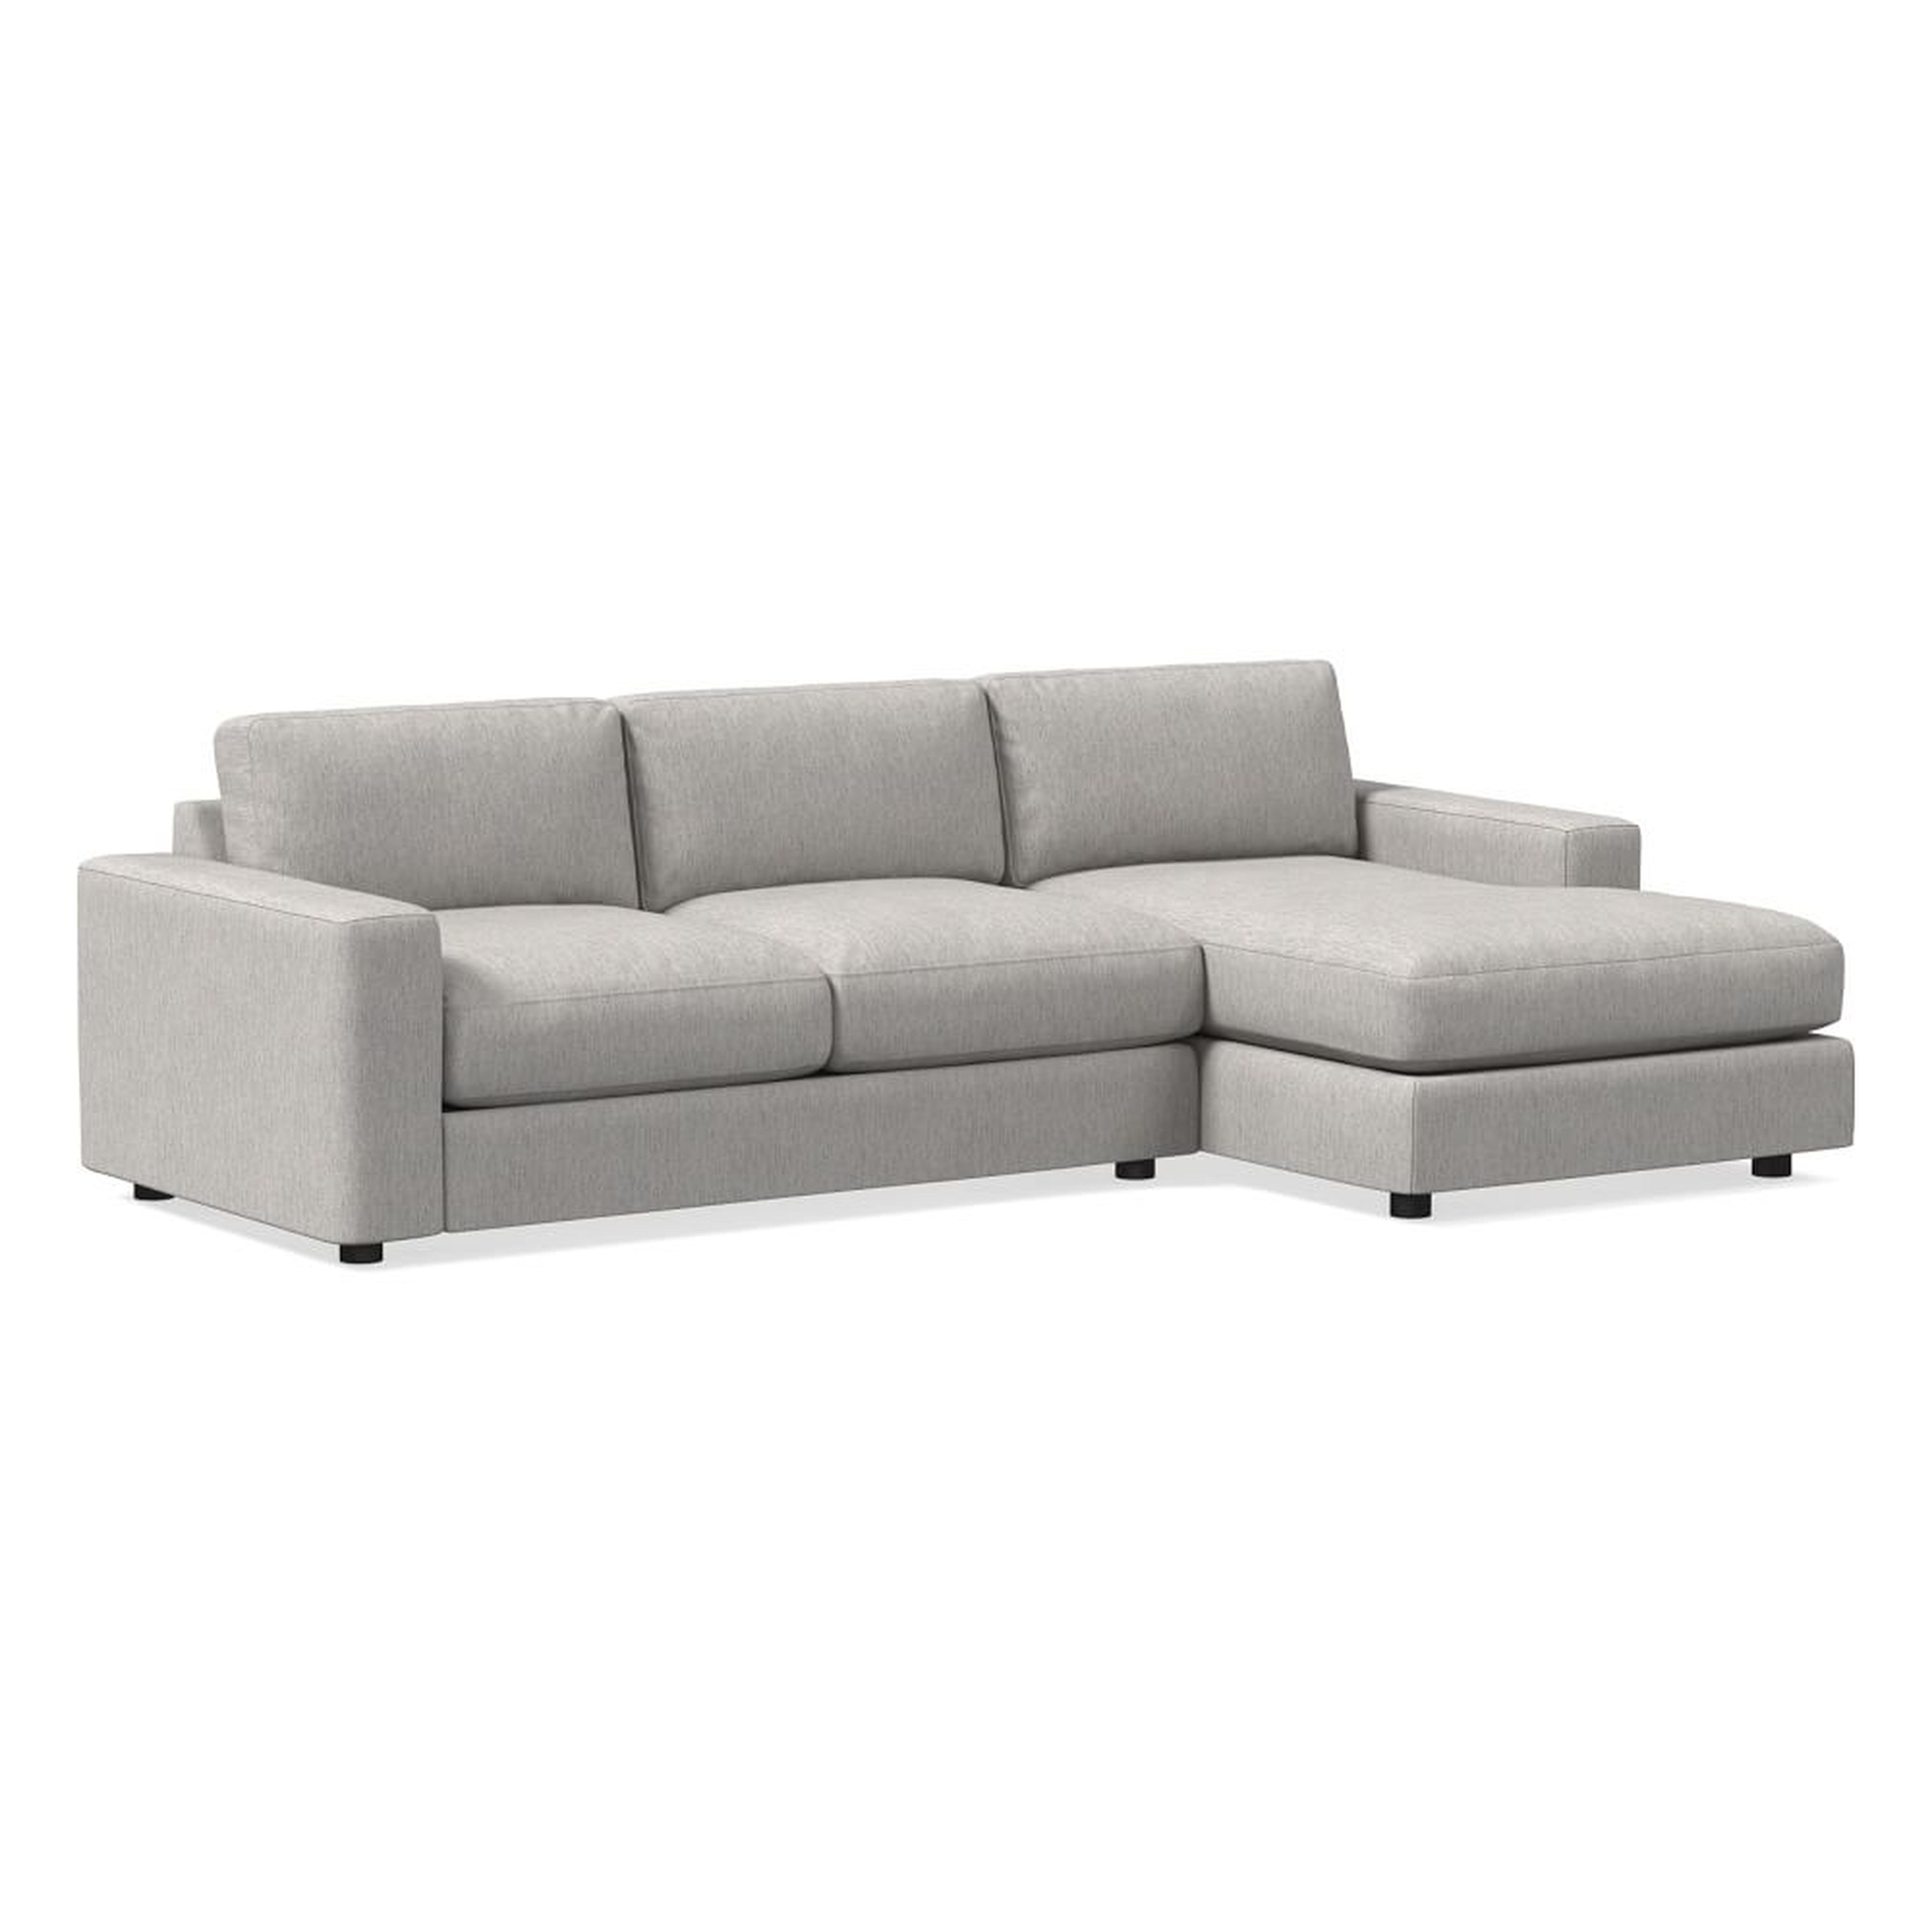 Urban Sectional Set 01: Left Arm 2 Seater Sofa, Right Arm Chaise, Poly, Performance Coastal Linen, Storm Gray, Concealed Supports - West Elm